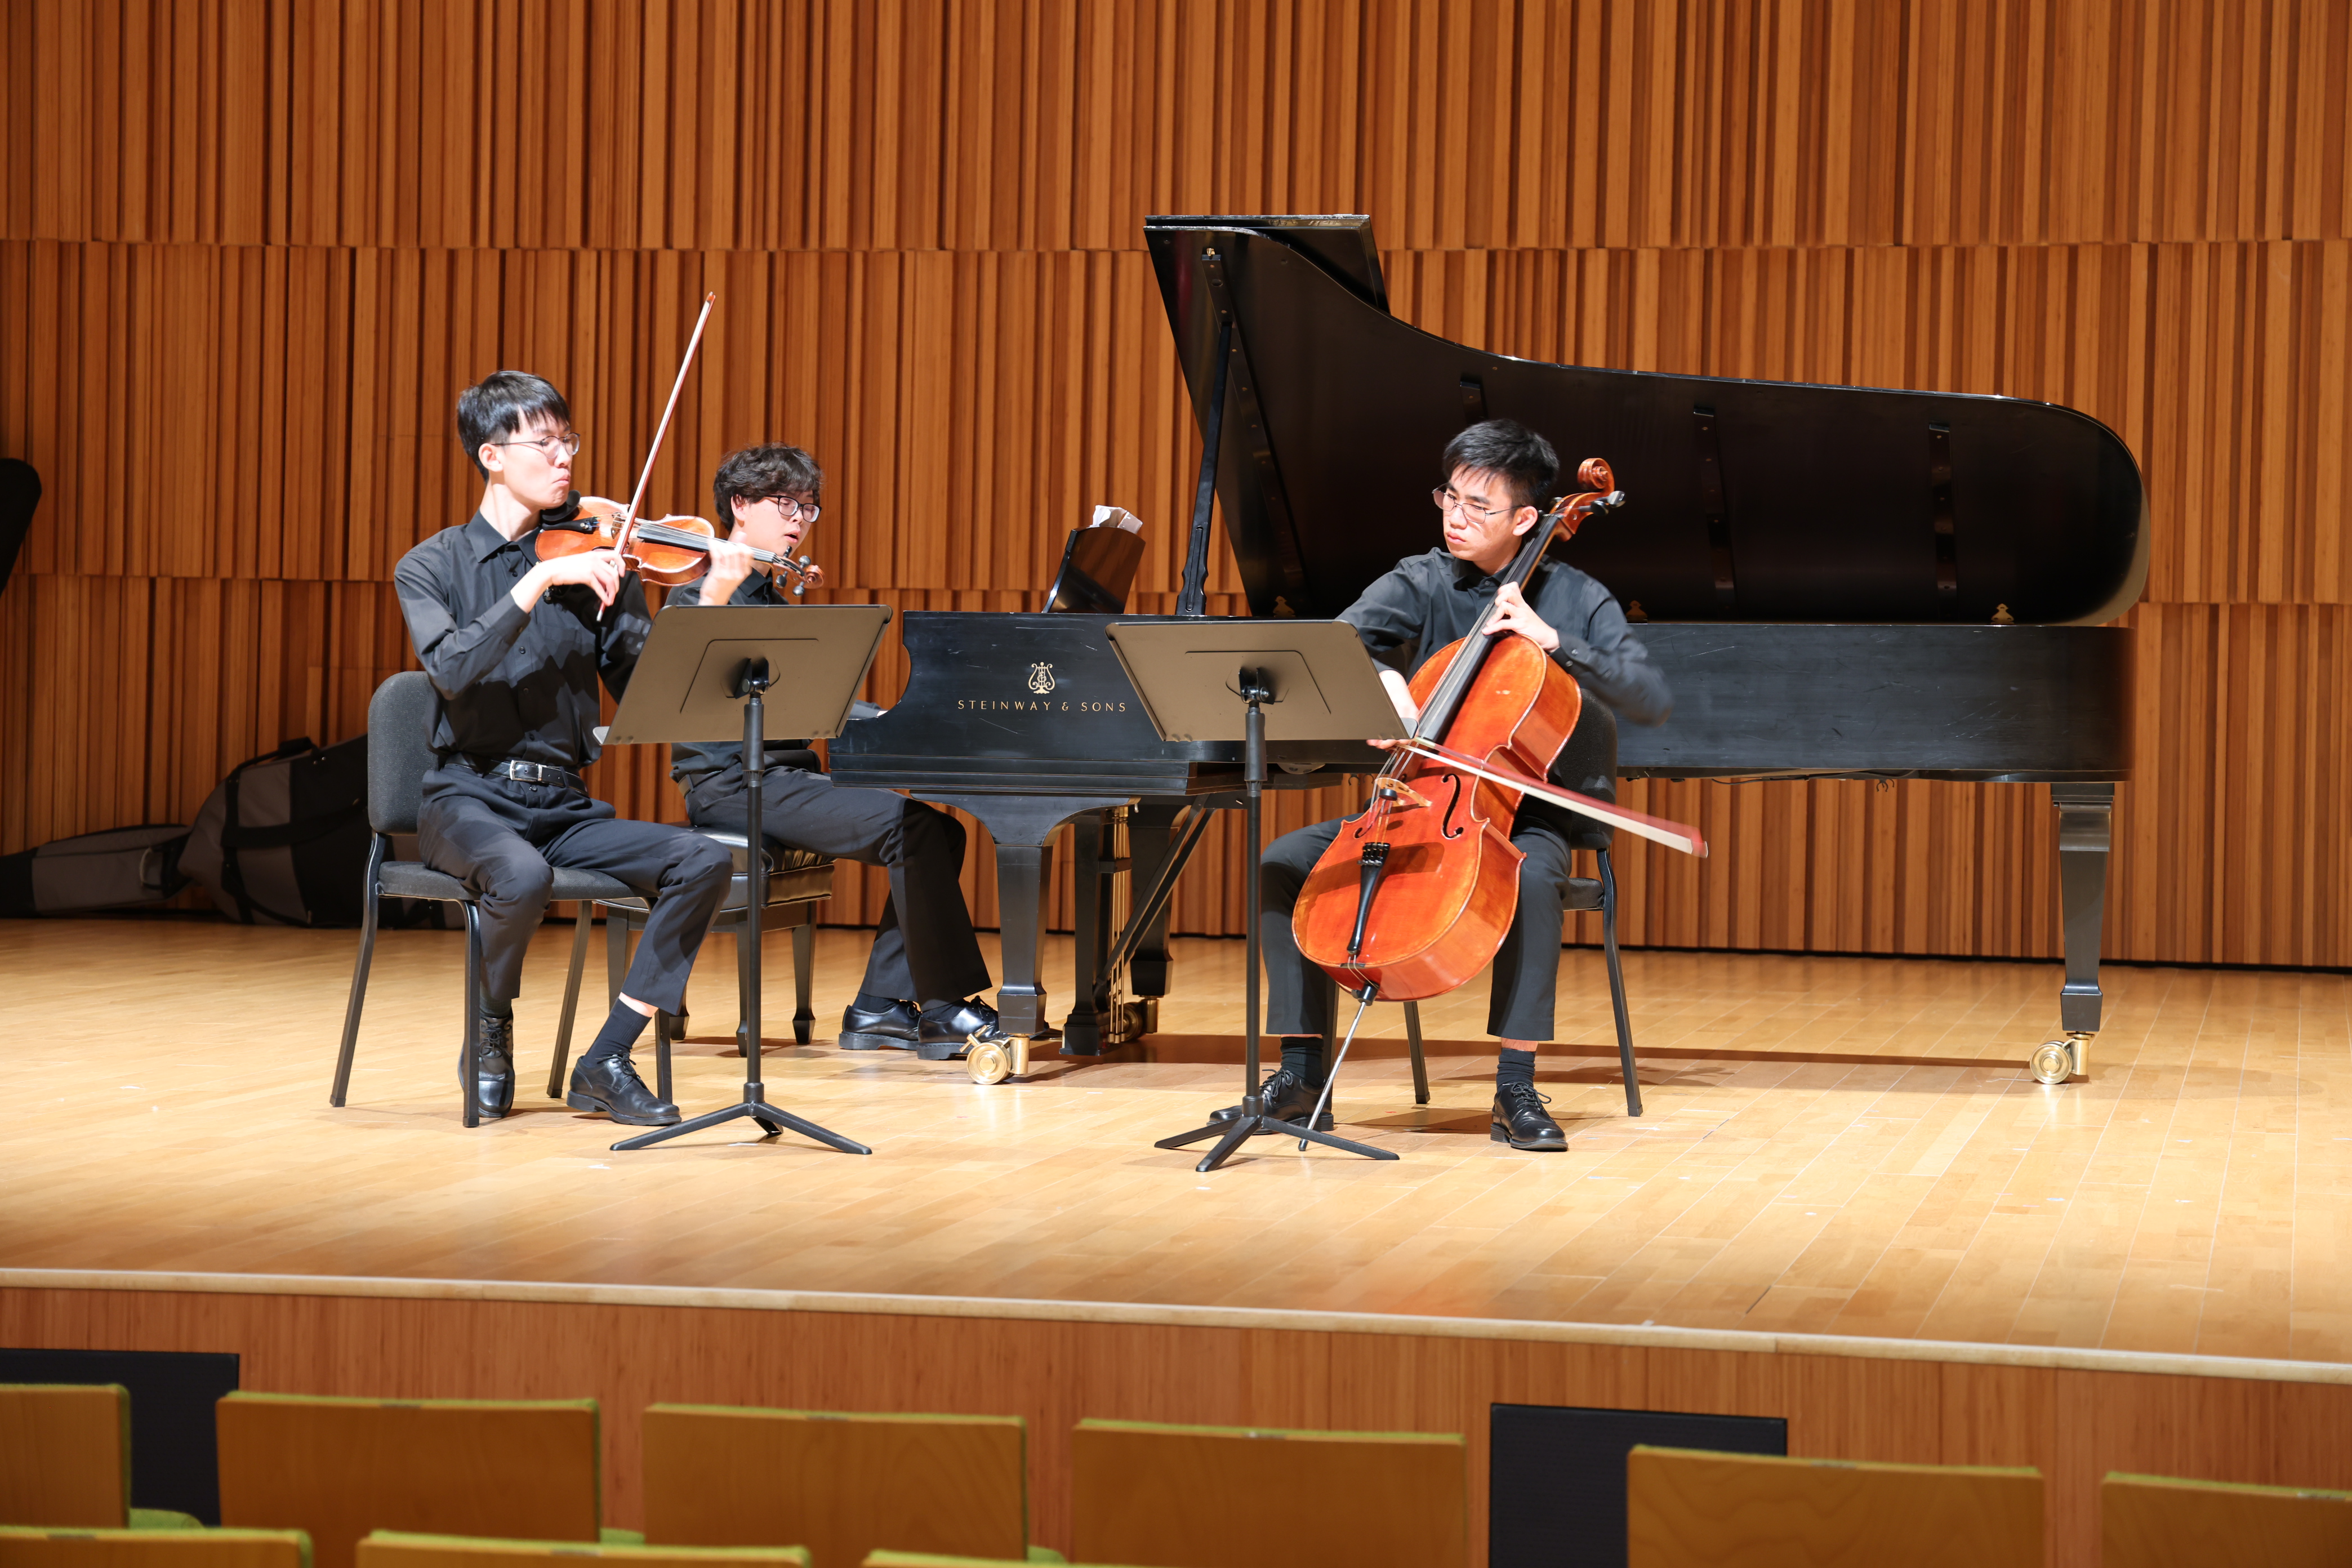 Chamber Music Masterclass with Ensemble Dal Niente